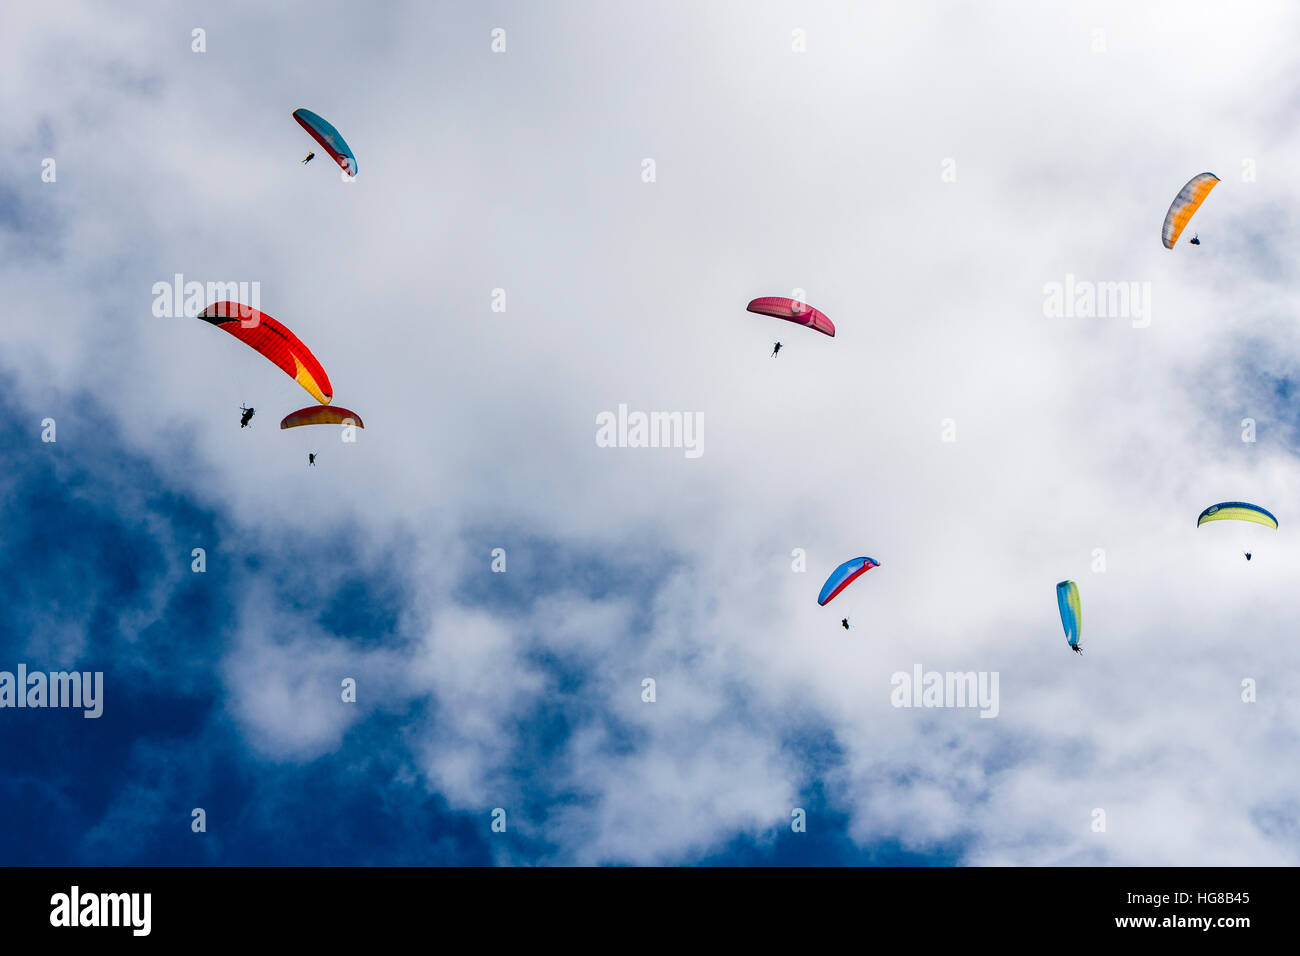 Many paragliders are flying in the air, over Pokhara and Phewa Lake, Sarangkot, Kaski District, Nepal Stock Photo